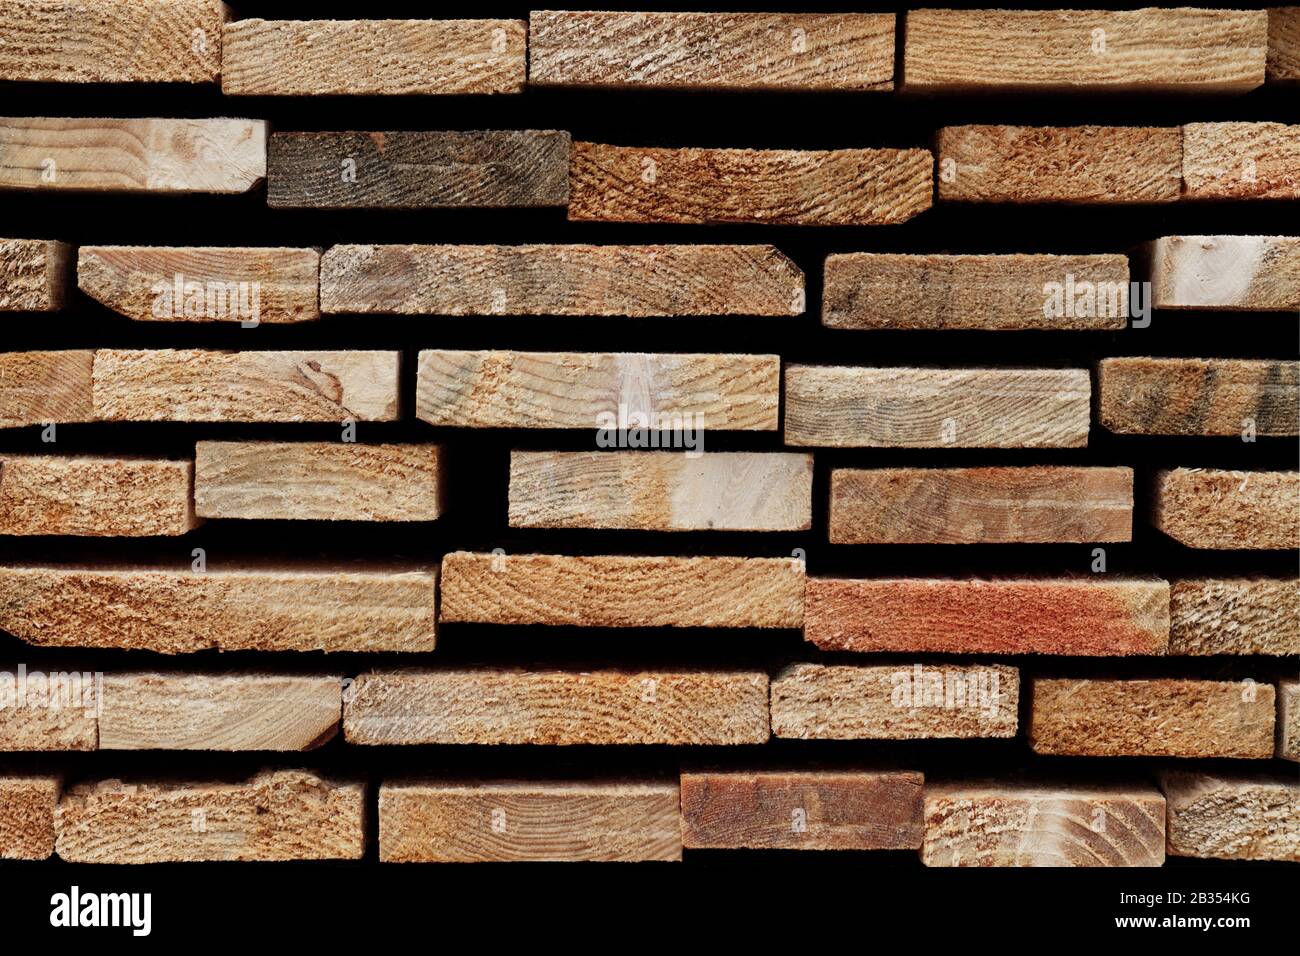 Softwood Texture: Detail of Sawn Wooden Slats Stock Photo